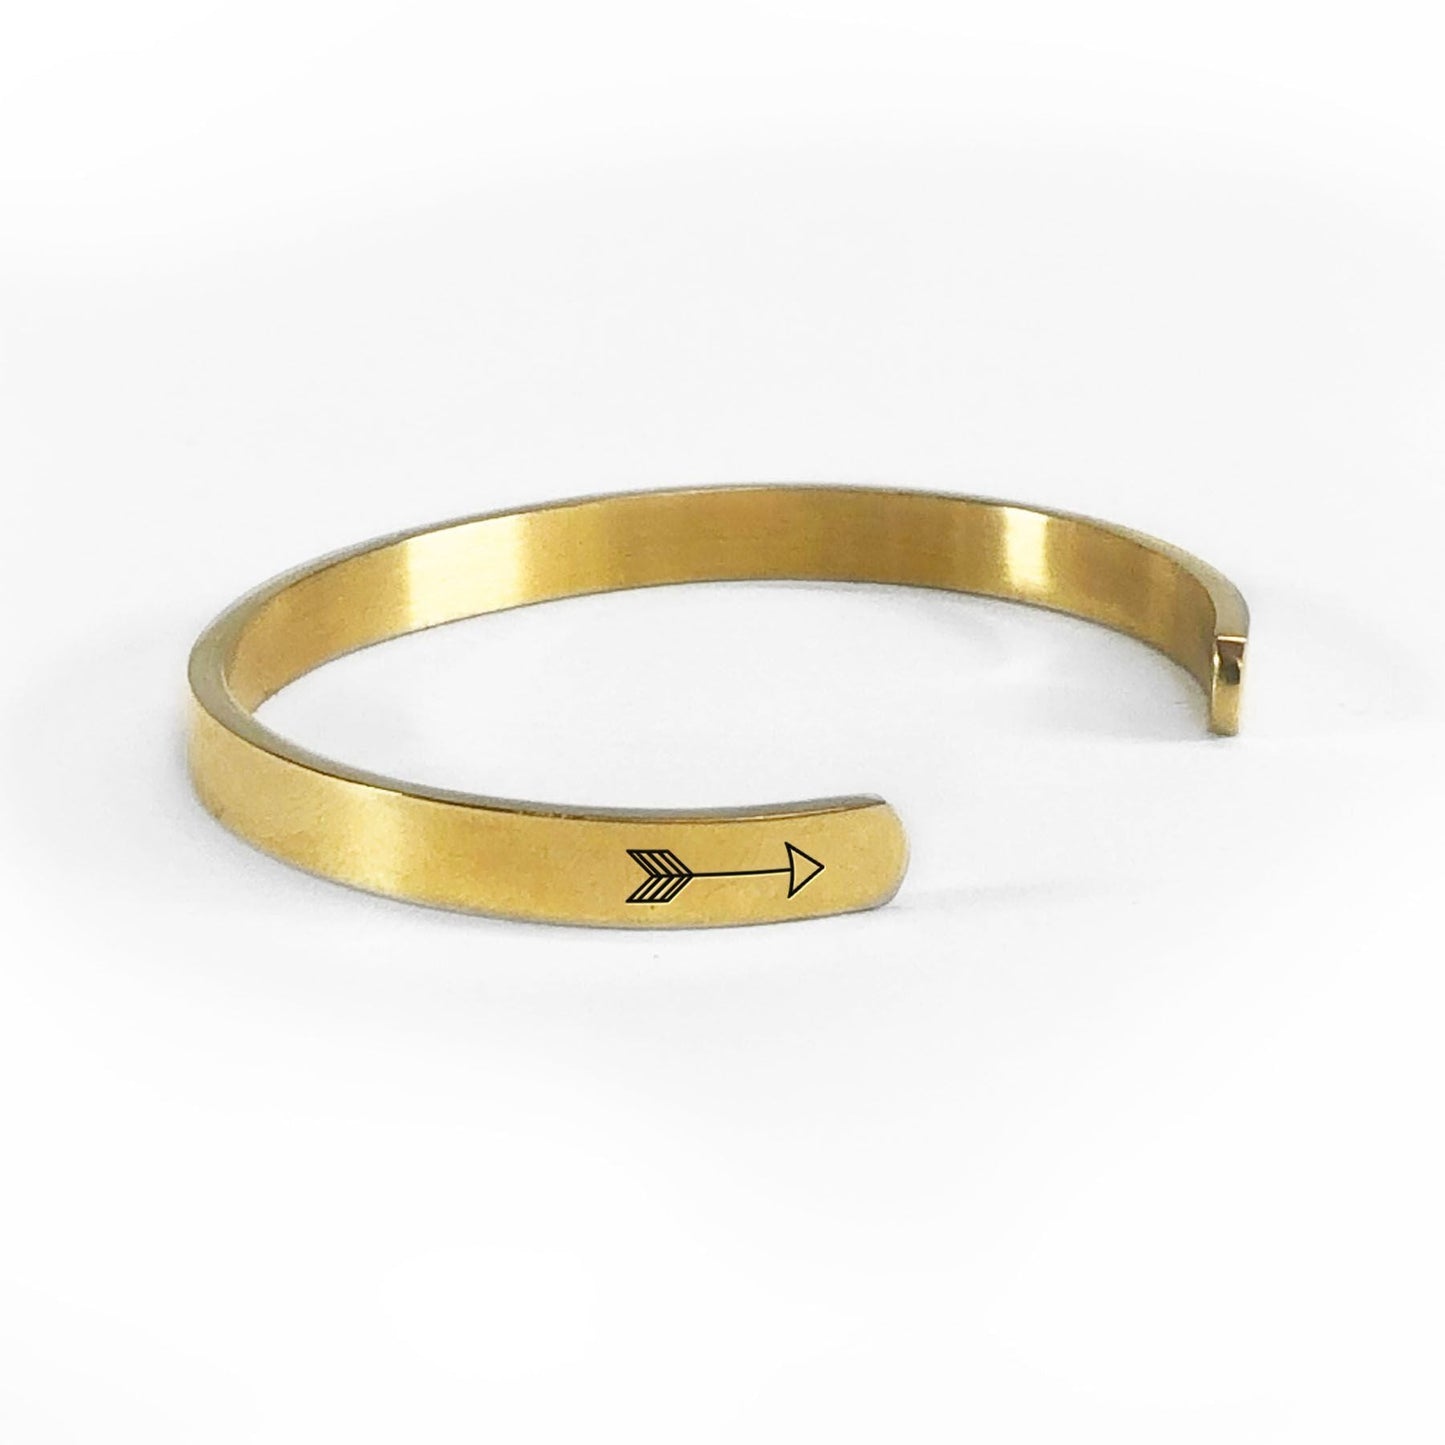 Live what you love bracelet in gold rotated to show arrows and cuff opening